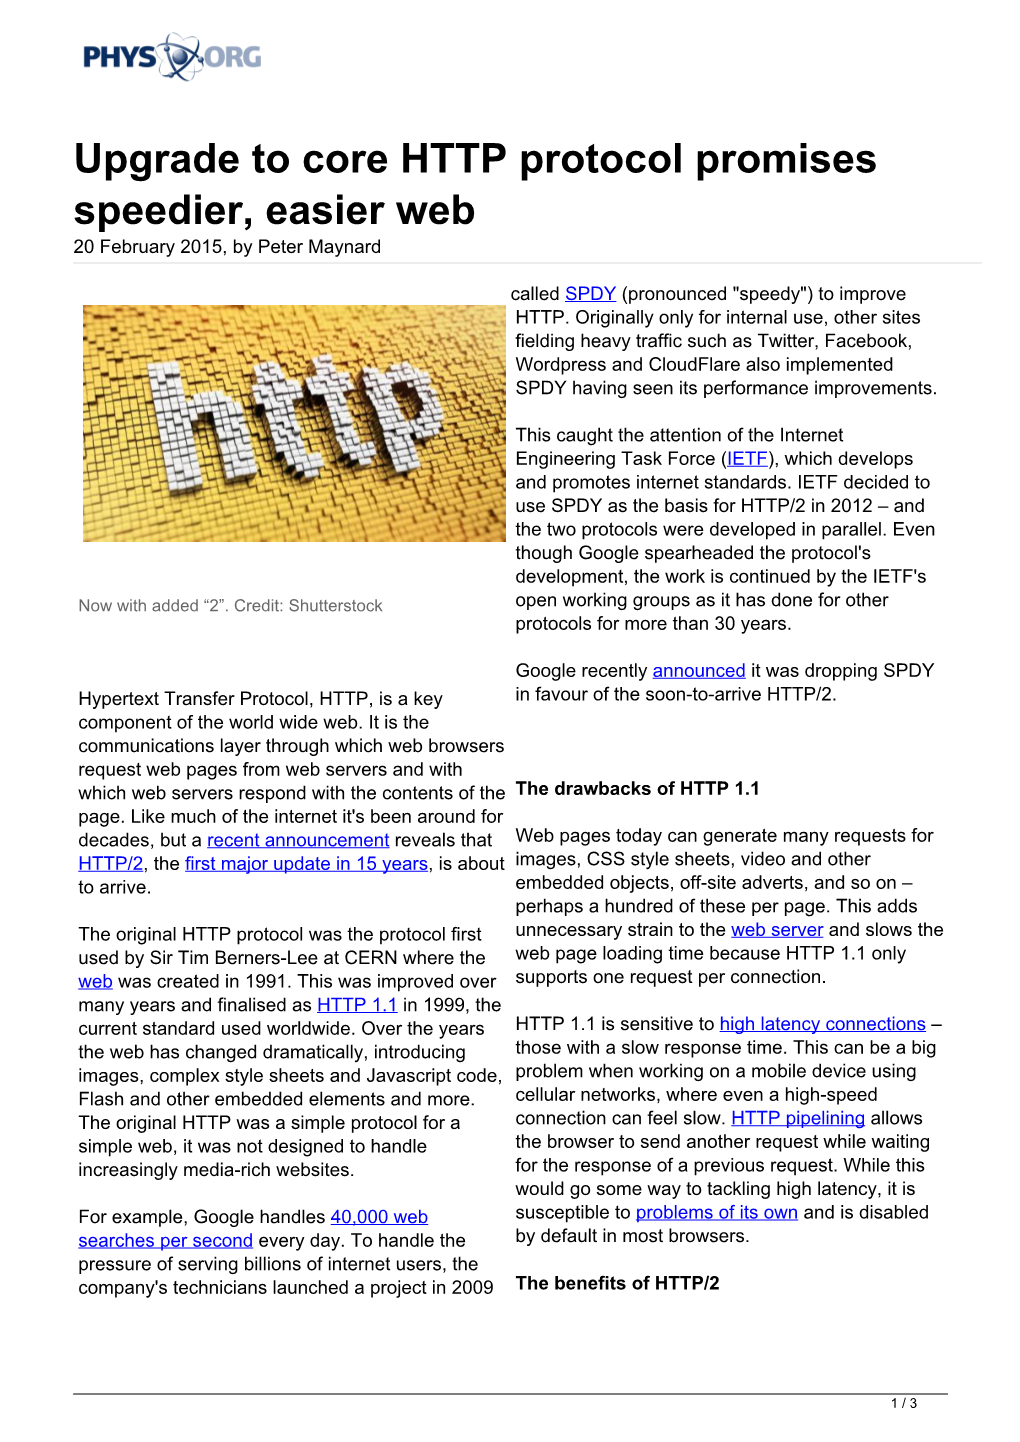 Upgrade to Core HTTP Protocol Promises Speedier, Easier Web 20 February 2015, by Peter Maynard